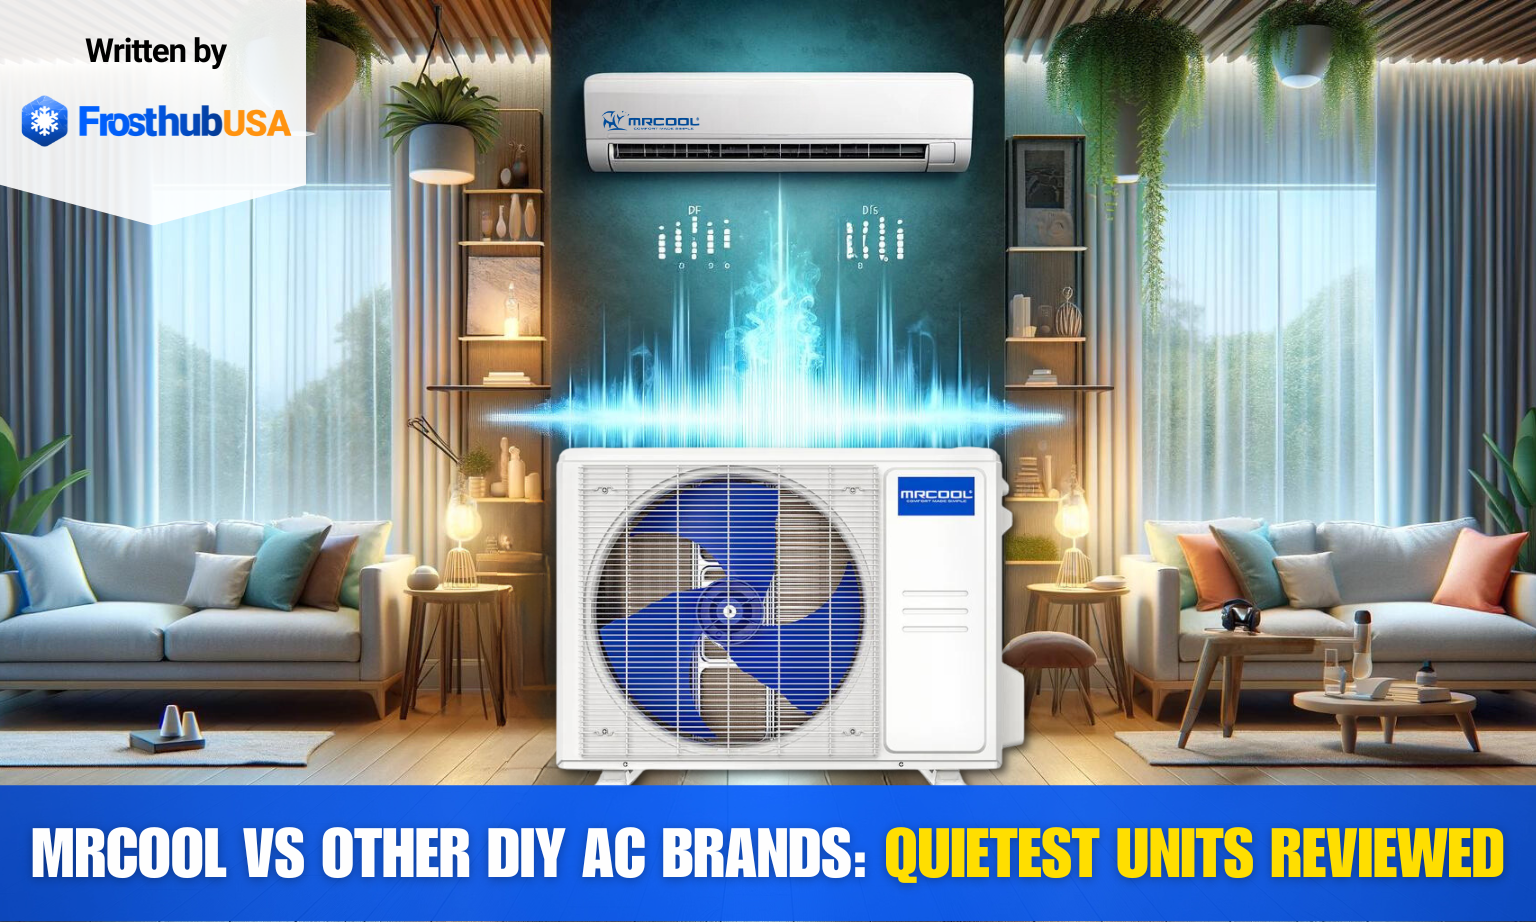 MRCOOL vs Other DIY AC: Which one is the quietest? - FrosthubUSA